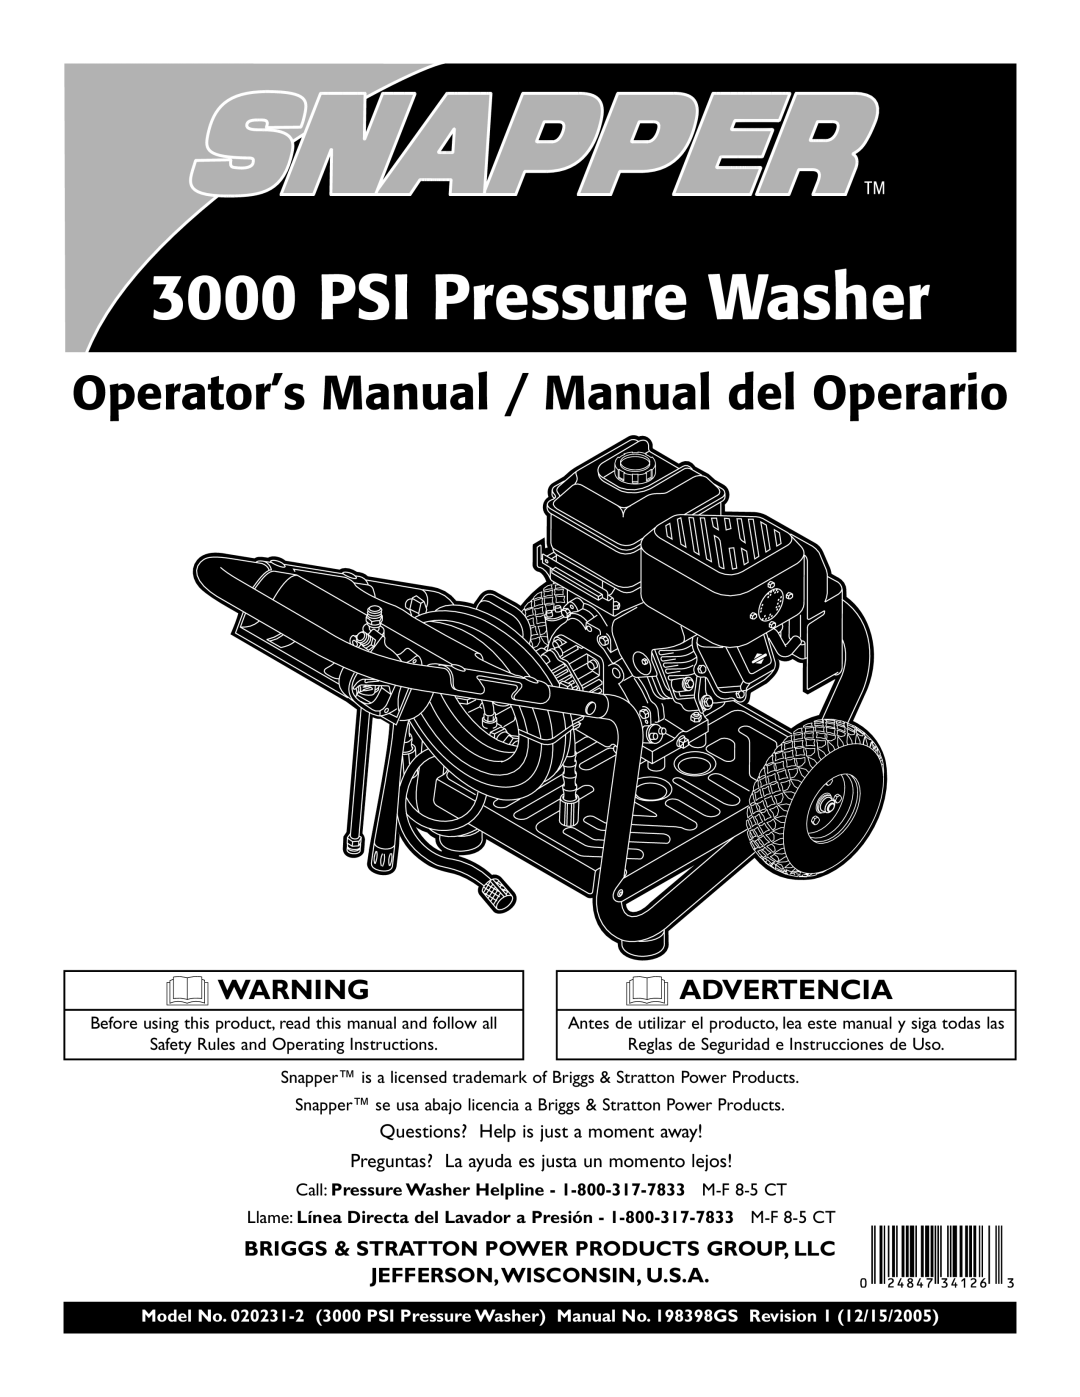 Snapper 020231-2 manual Advertencia, Briggs & Stratton Power Products Group, Llc, Jefferson,Wisconsin, U.S.A 